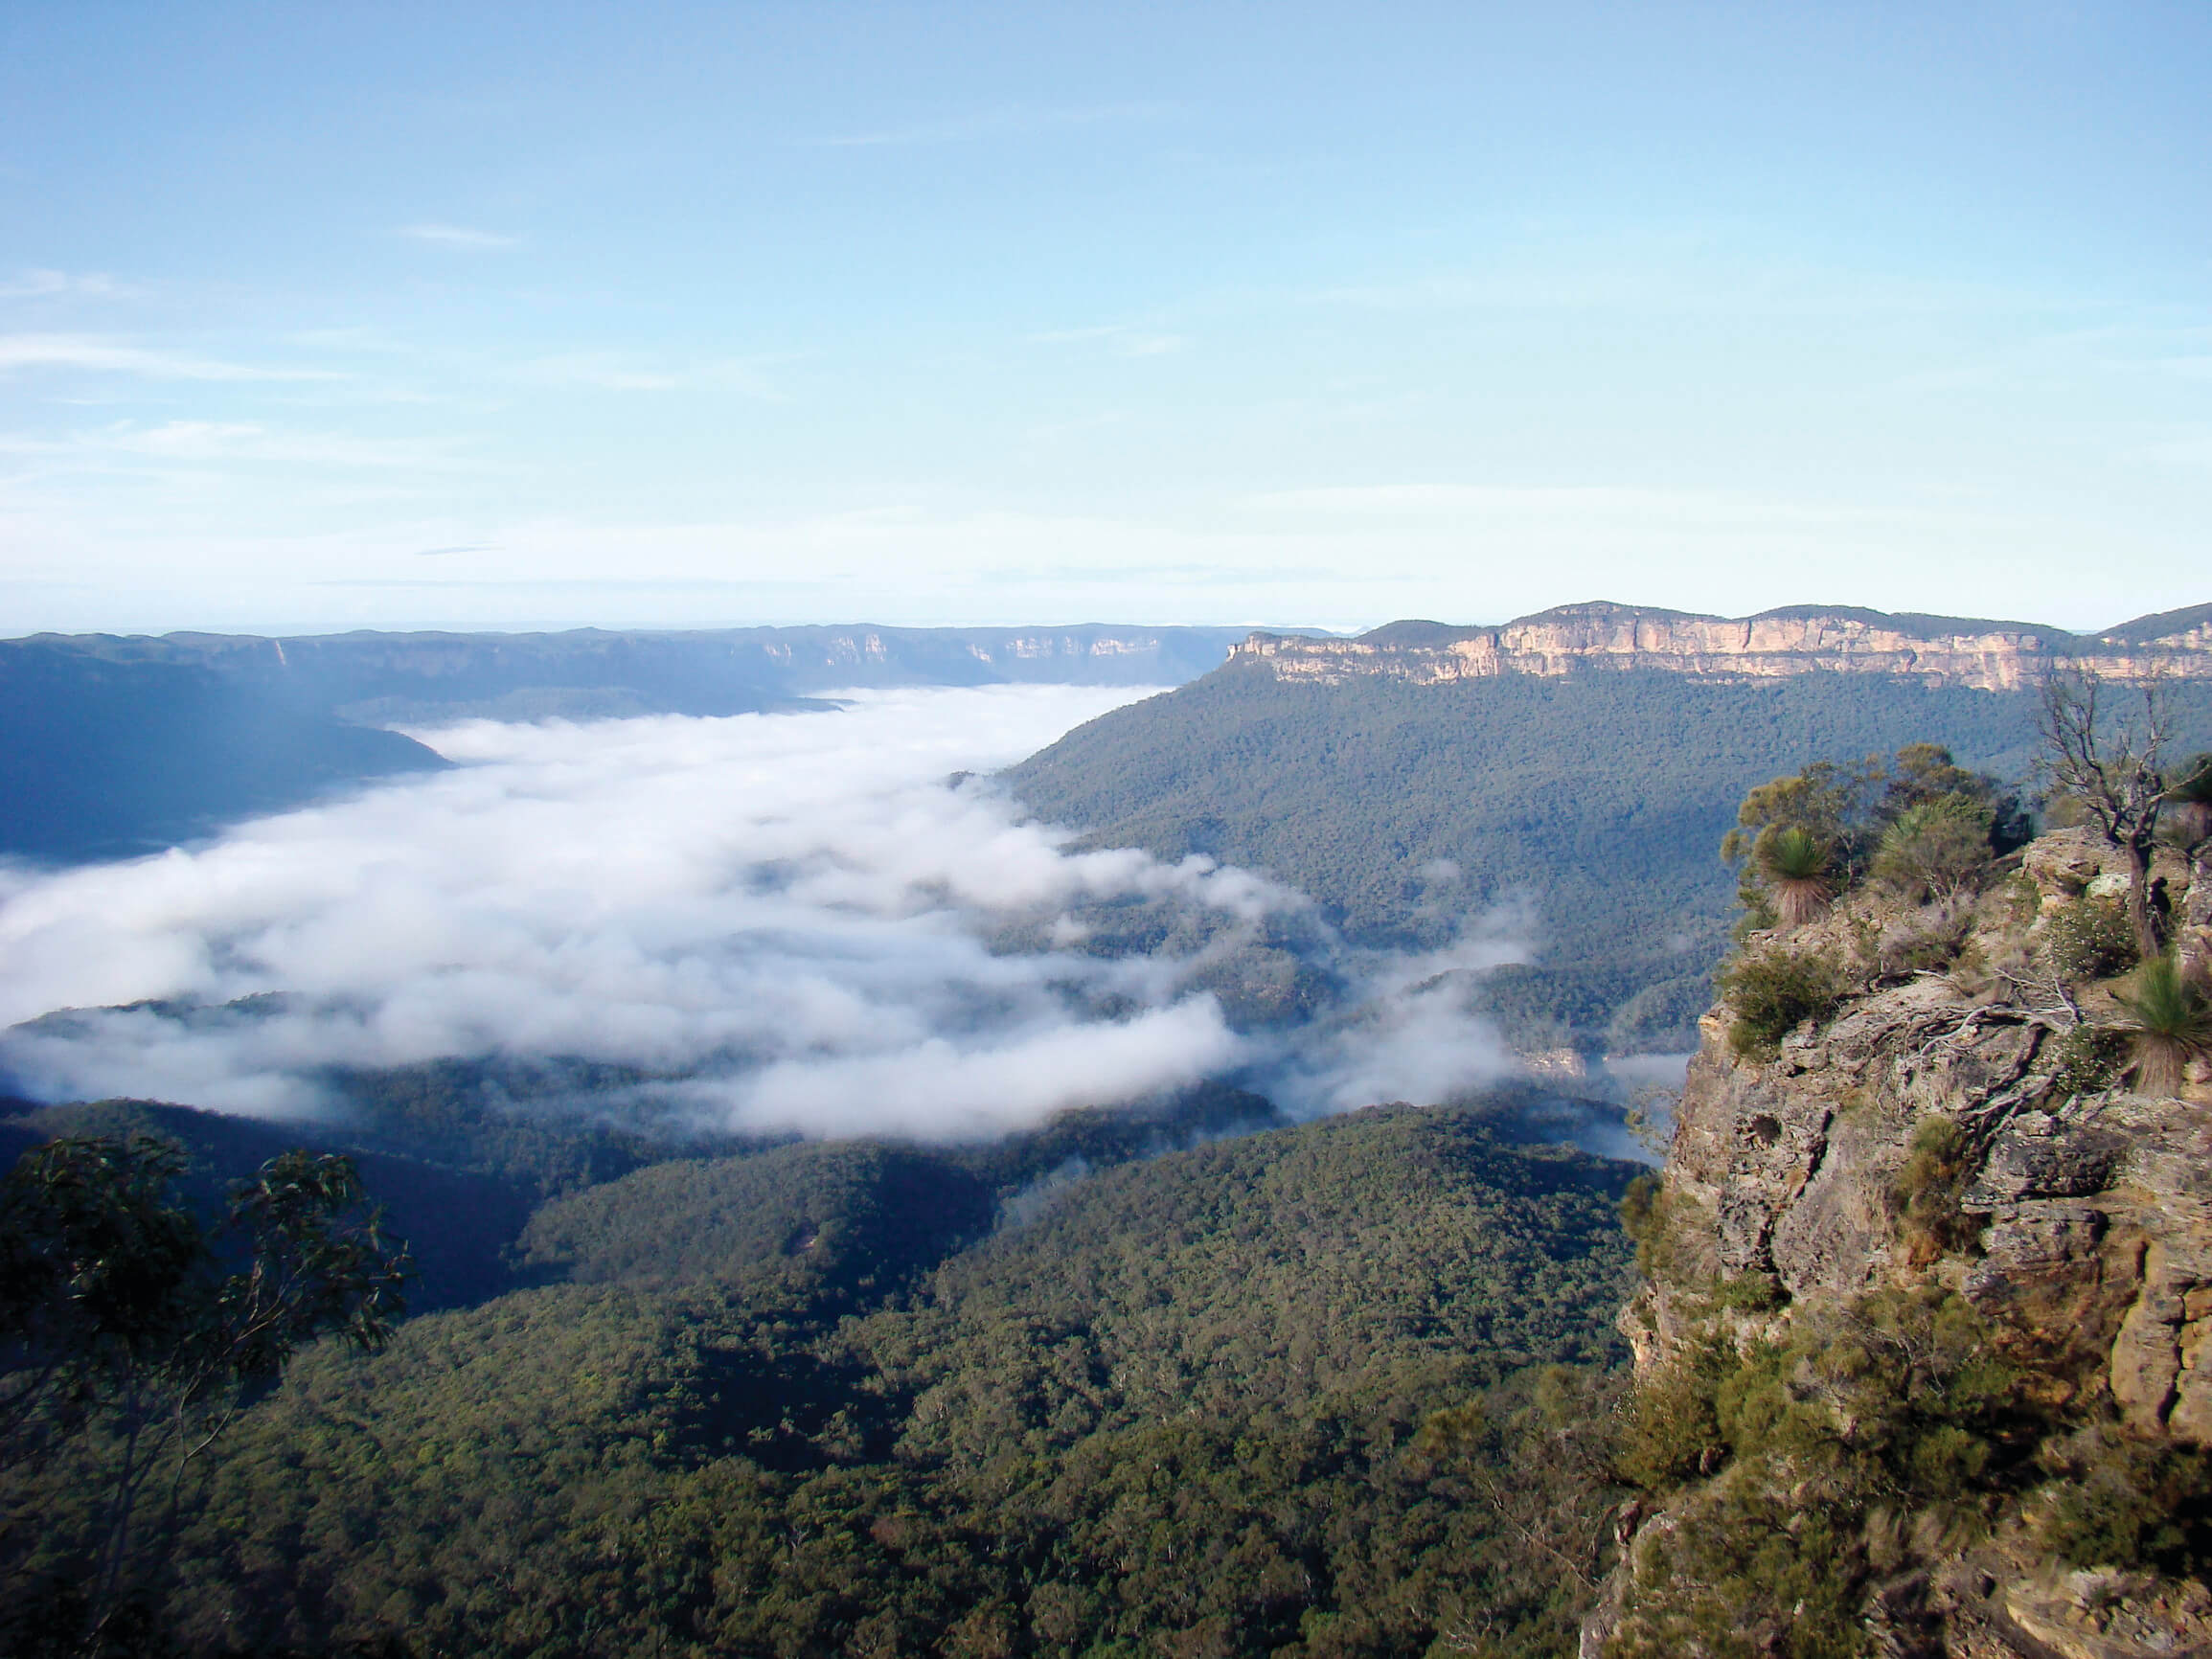 The Greater Blue Mountains World Heritage Area